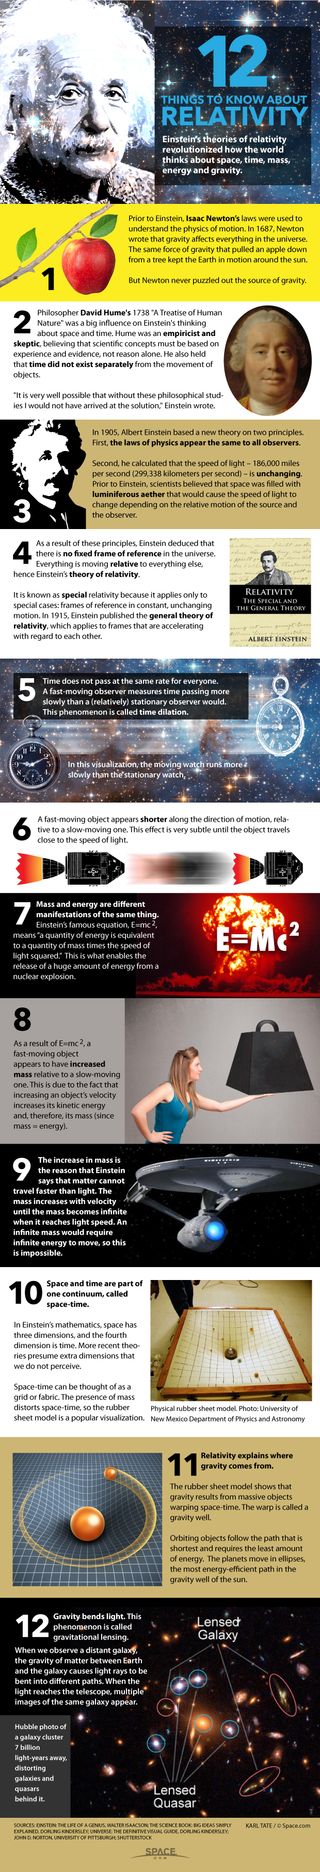 2015 marks 100 years since the publication of Albert Einstein's General Theory of Relativity. Learn the basics of Einstein's theory of relativity in our infographic here.